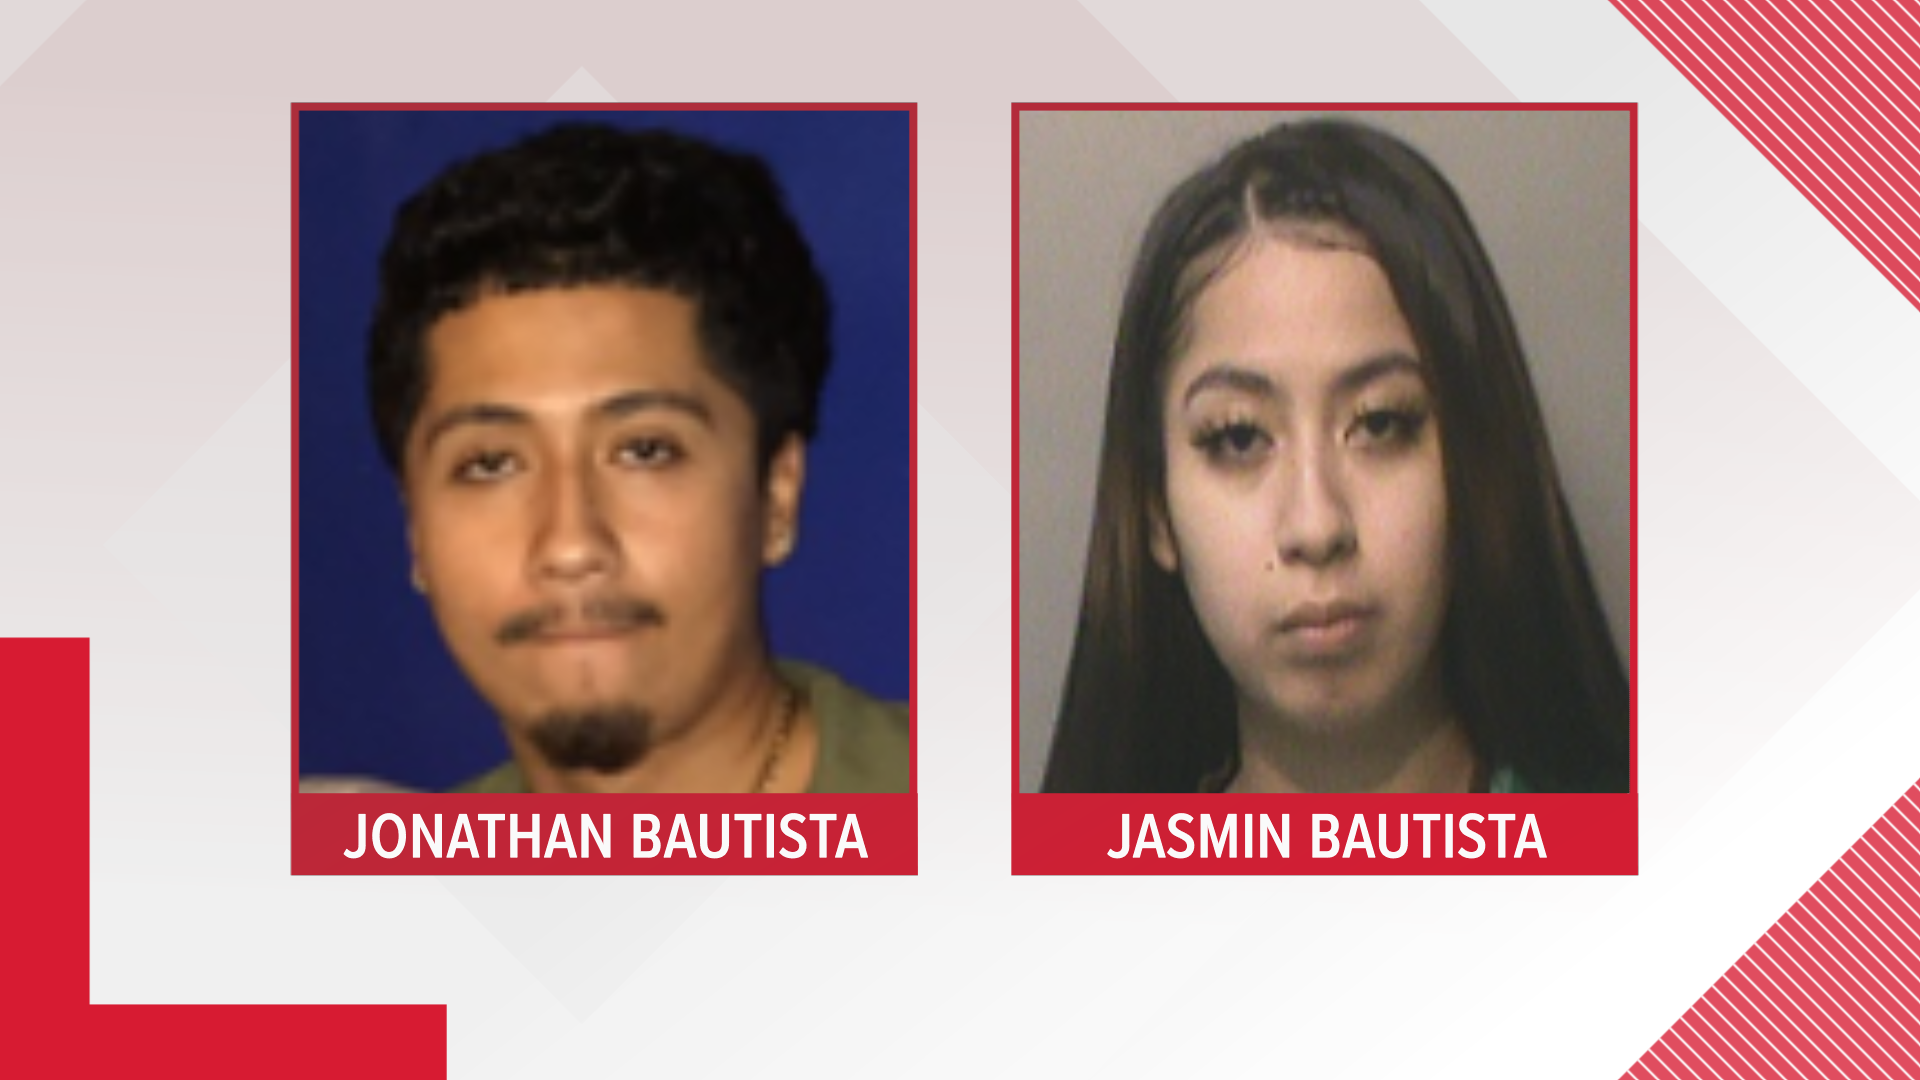 Police believe 18-year-old Jonathan Bautista and 20-year-old Jasmin Bautista could have critical information about the death of Javier Moncada.